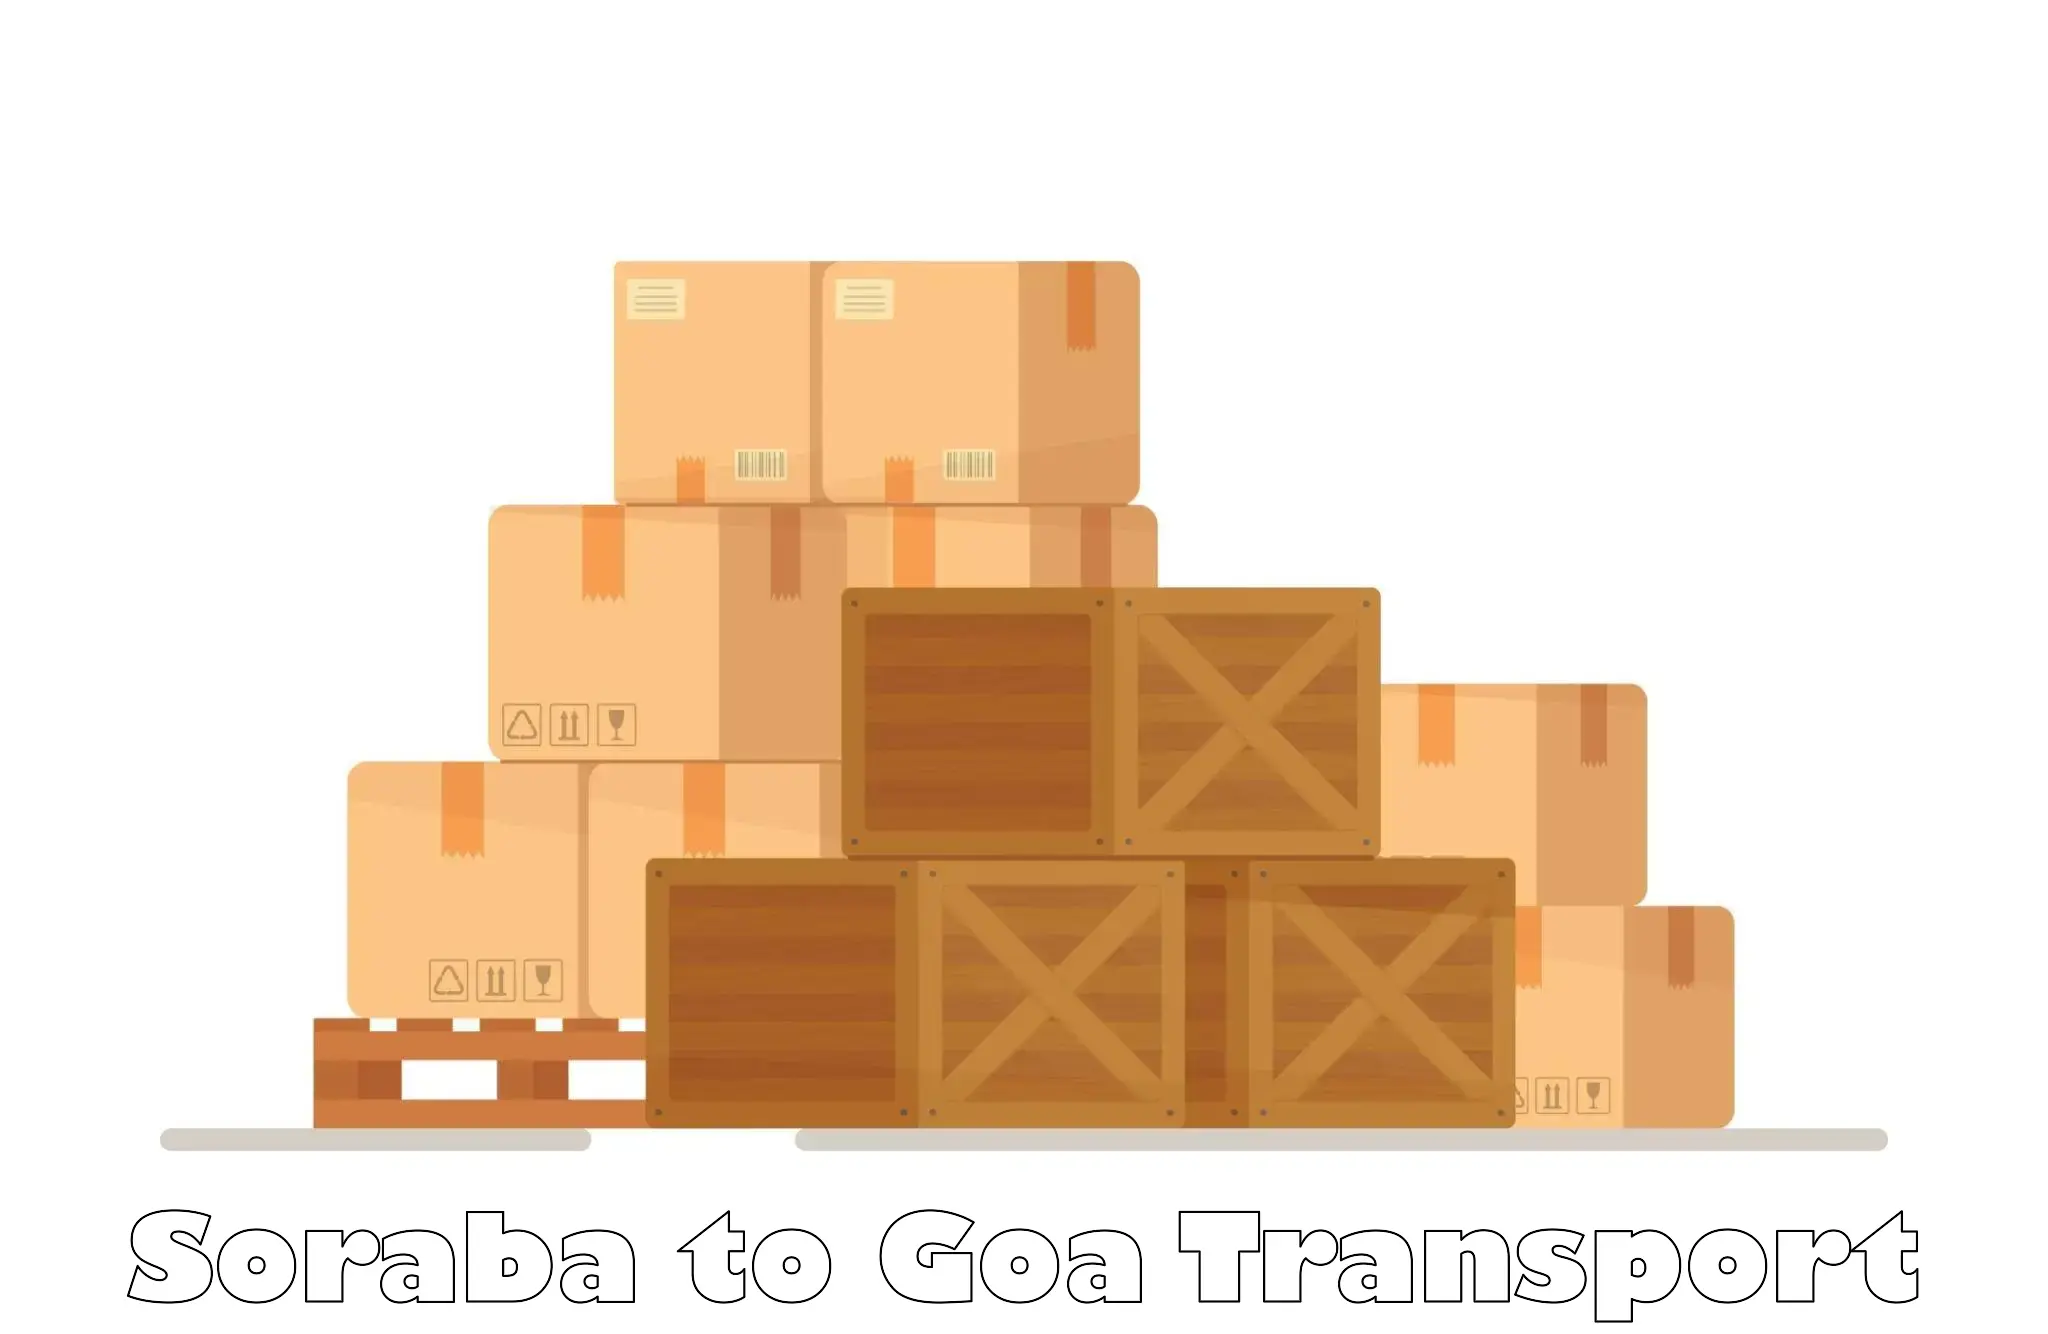 Transport bike from one state to another Soraba to Goa University